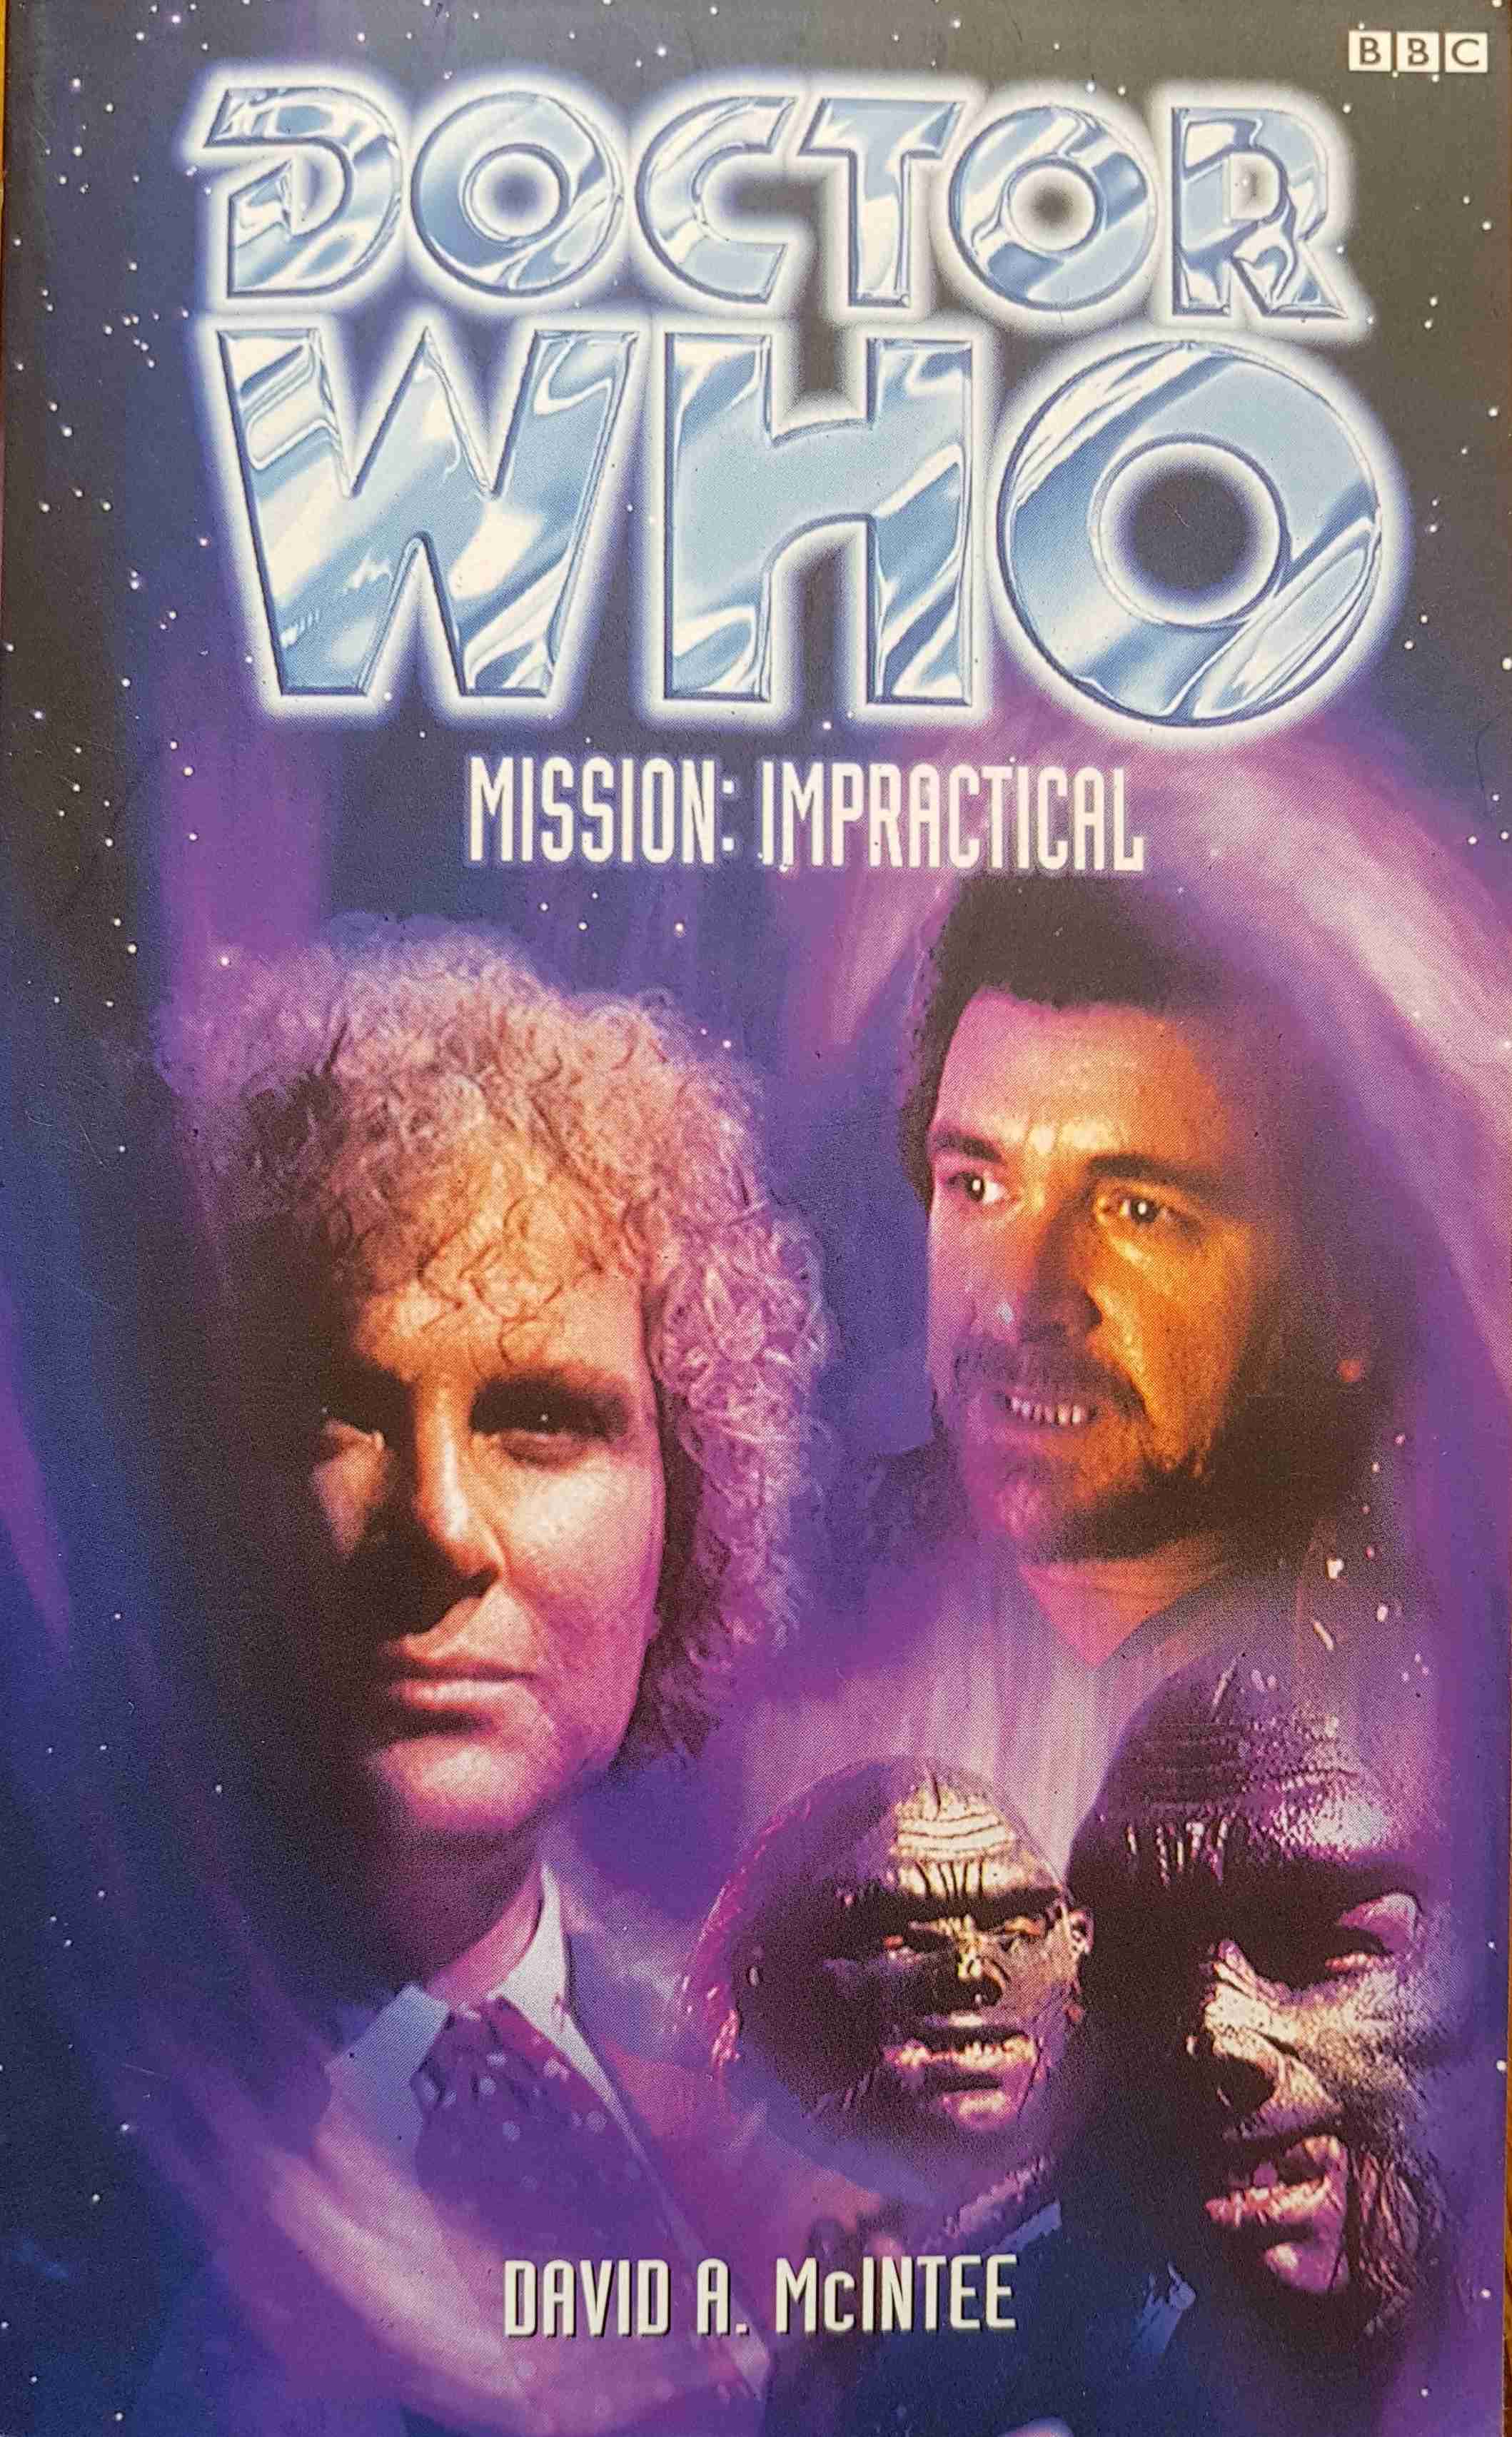 Picture of Doctor Who - Mission: Impractical by artist David A. McIntee from the BBC books - Records and Tapes library